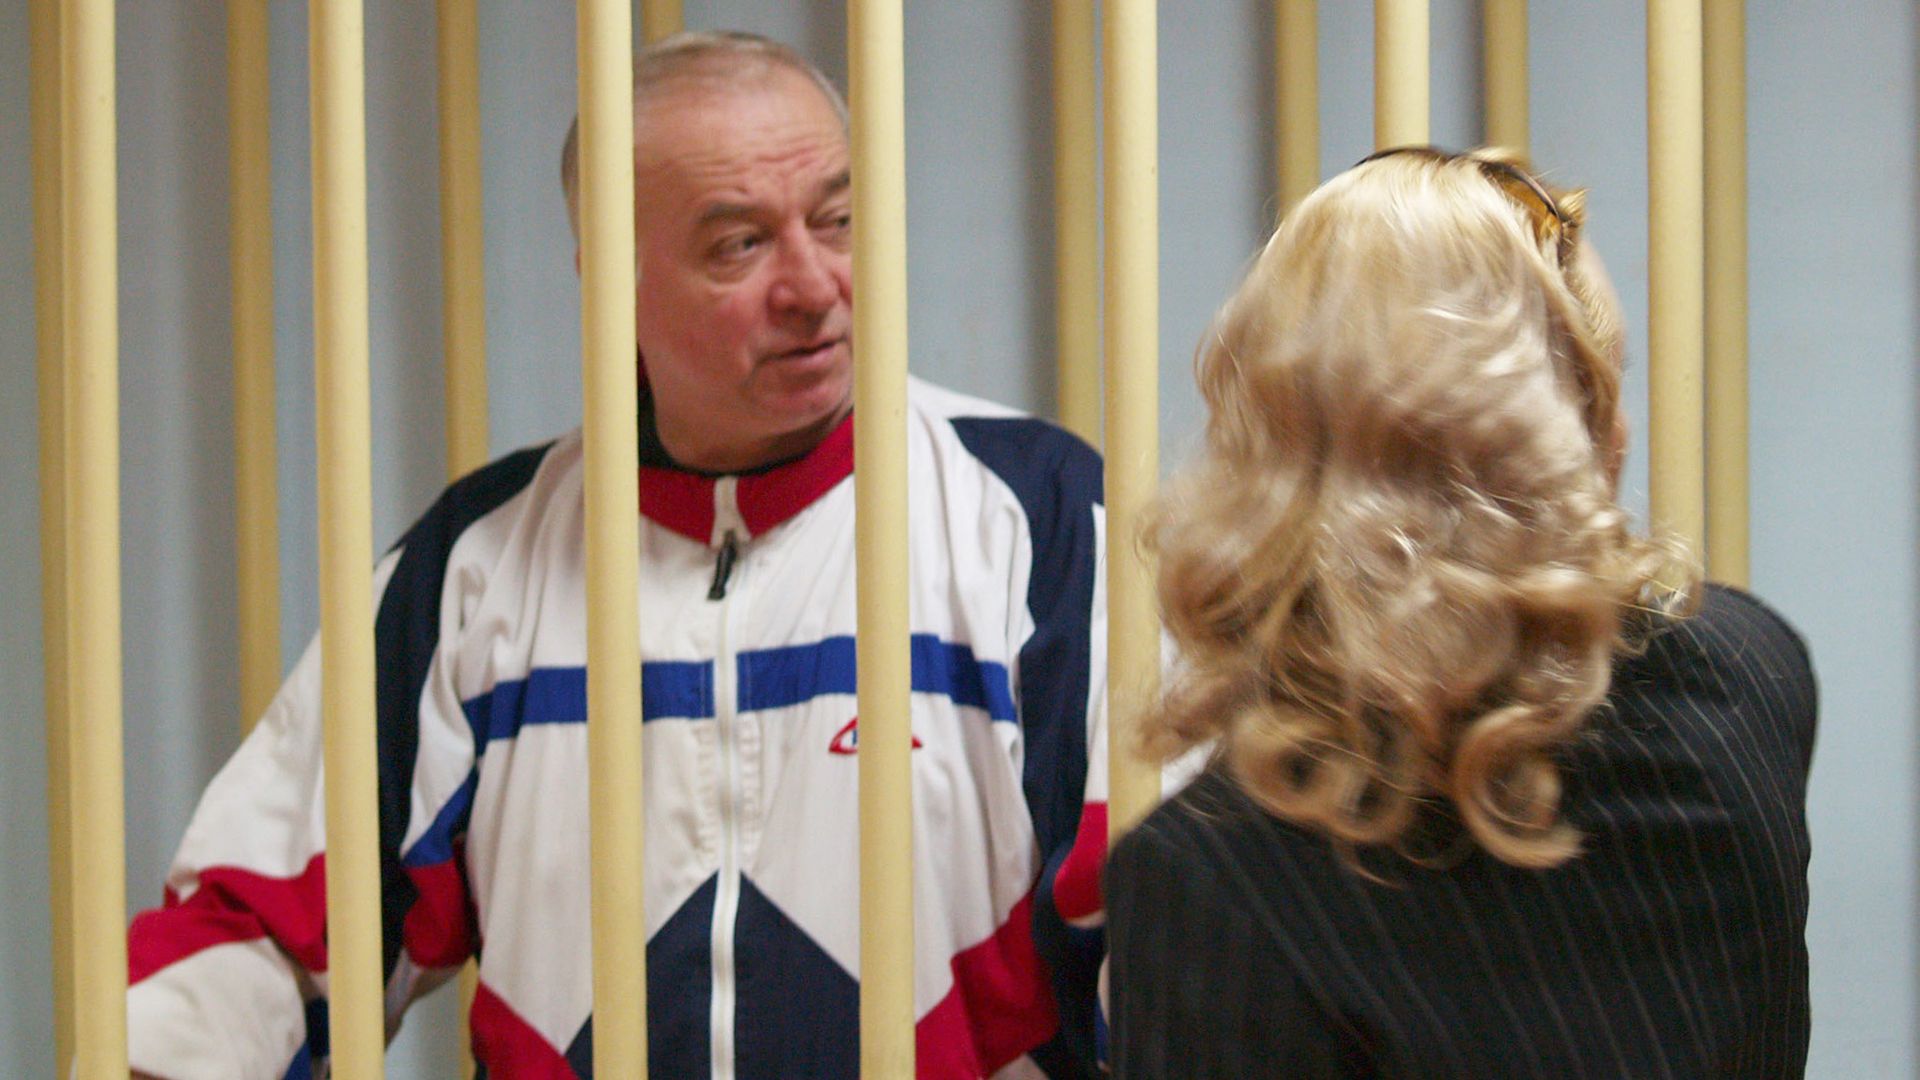 Sergei Skripal at Moscow district court stands behind bars